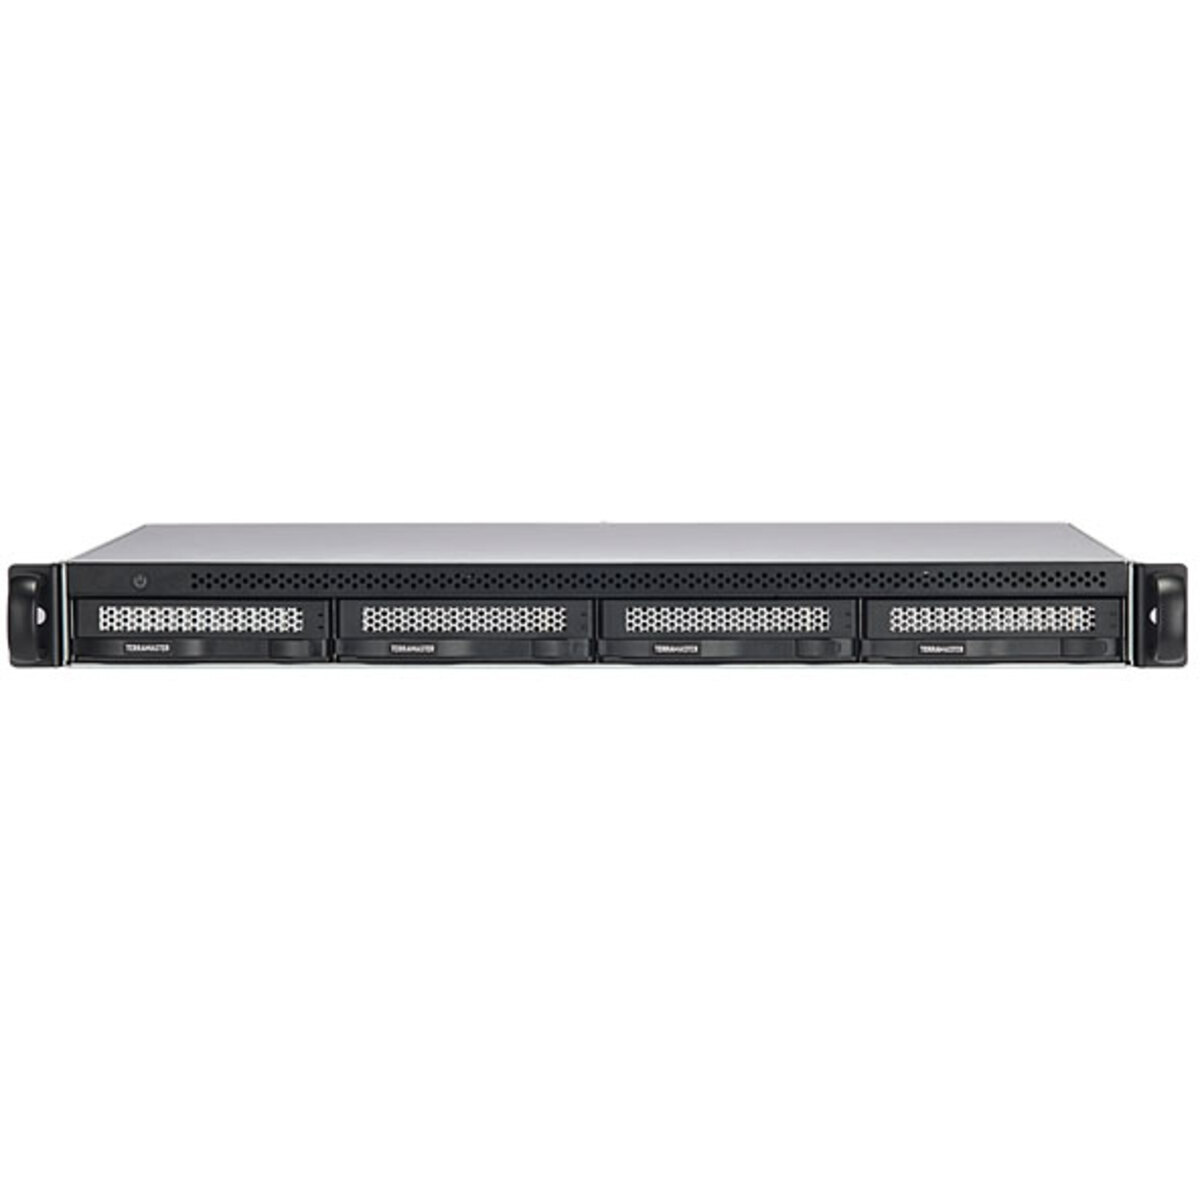 buy TerraMaster U4-211 RackMount NAS - Network Attached Storage Device Burn-In Tested Configurations - nas headquarters buy network attached storage server device das new raid-5 free shipping usa U4-211